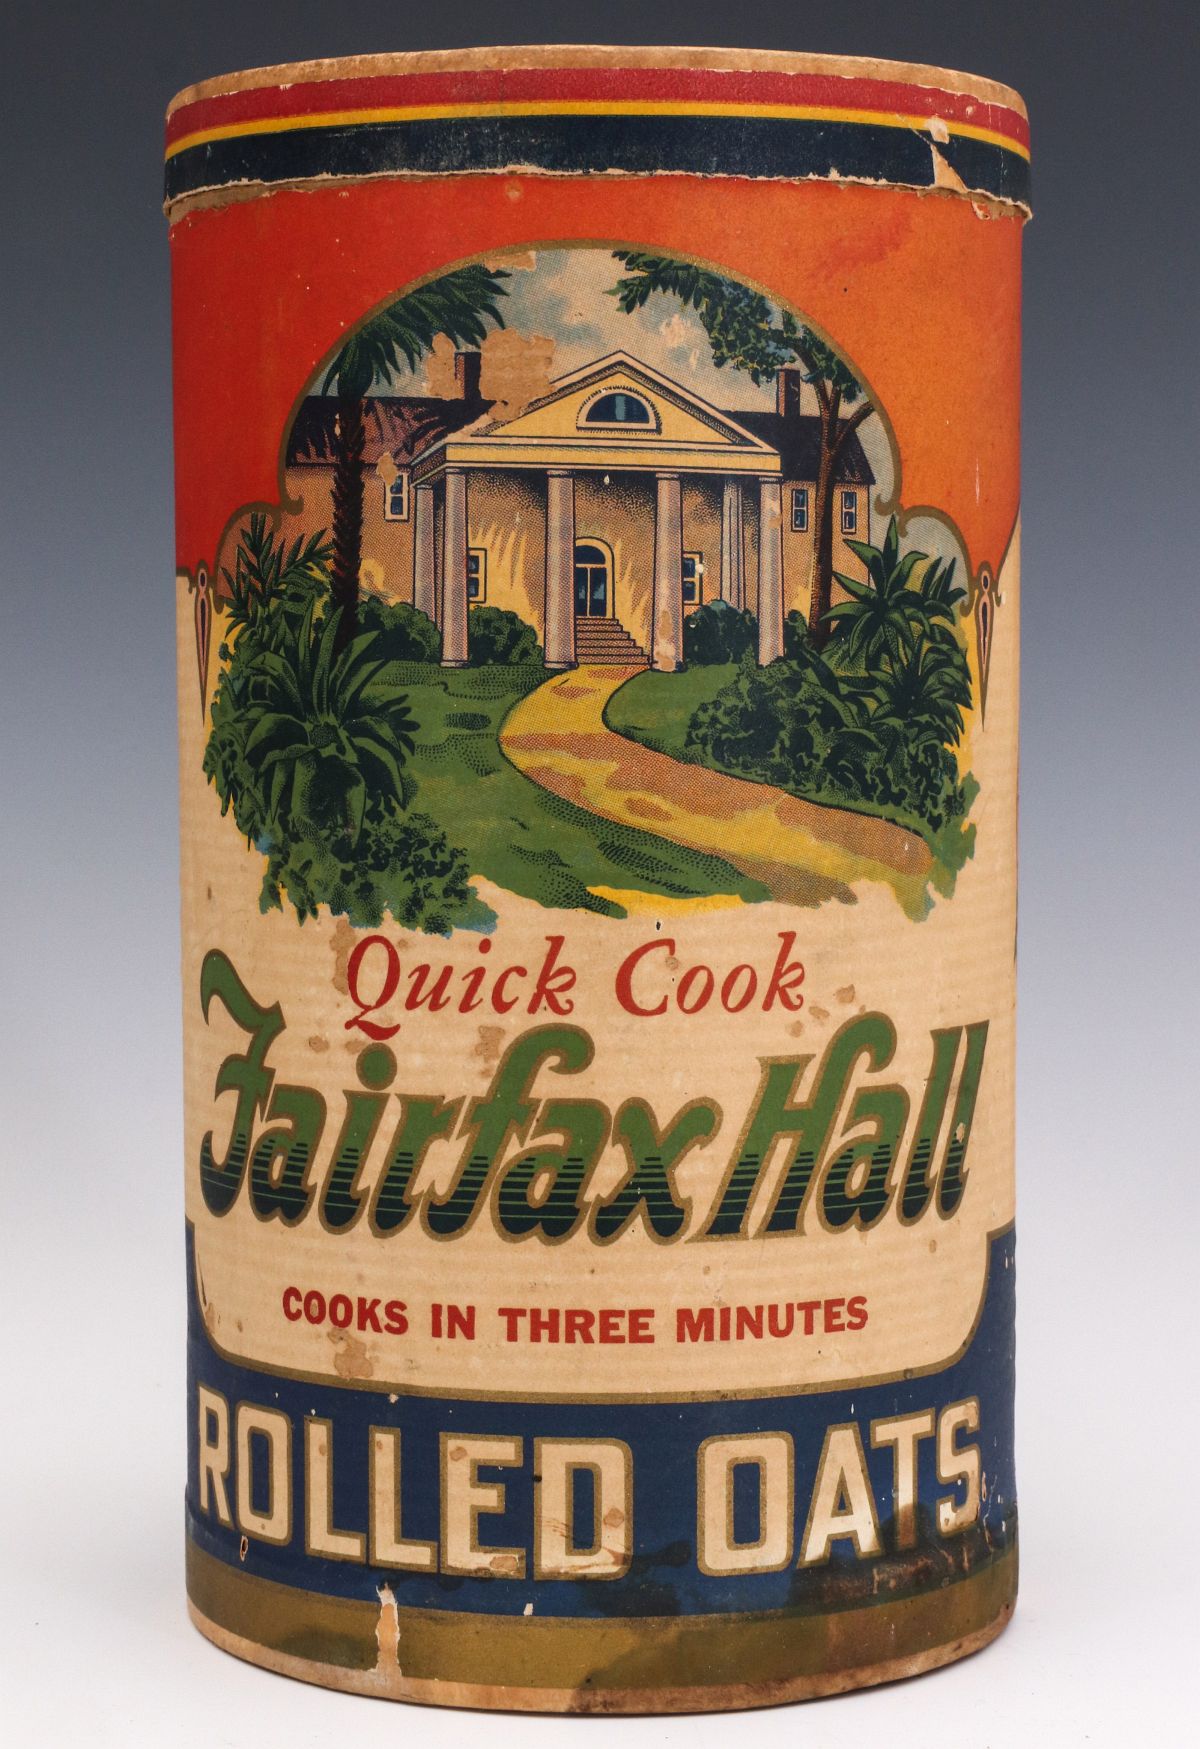 A FAIRFAX HALL BRAND ROLLED OATS CONTAINER